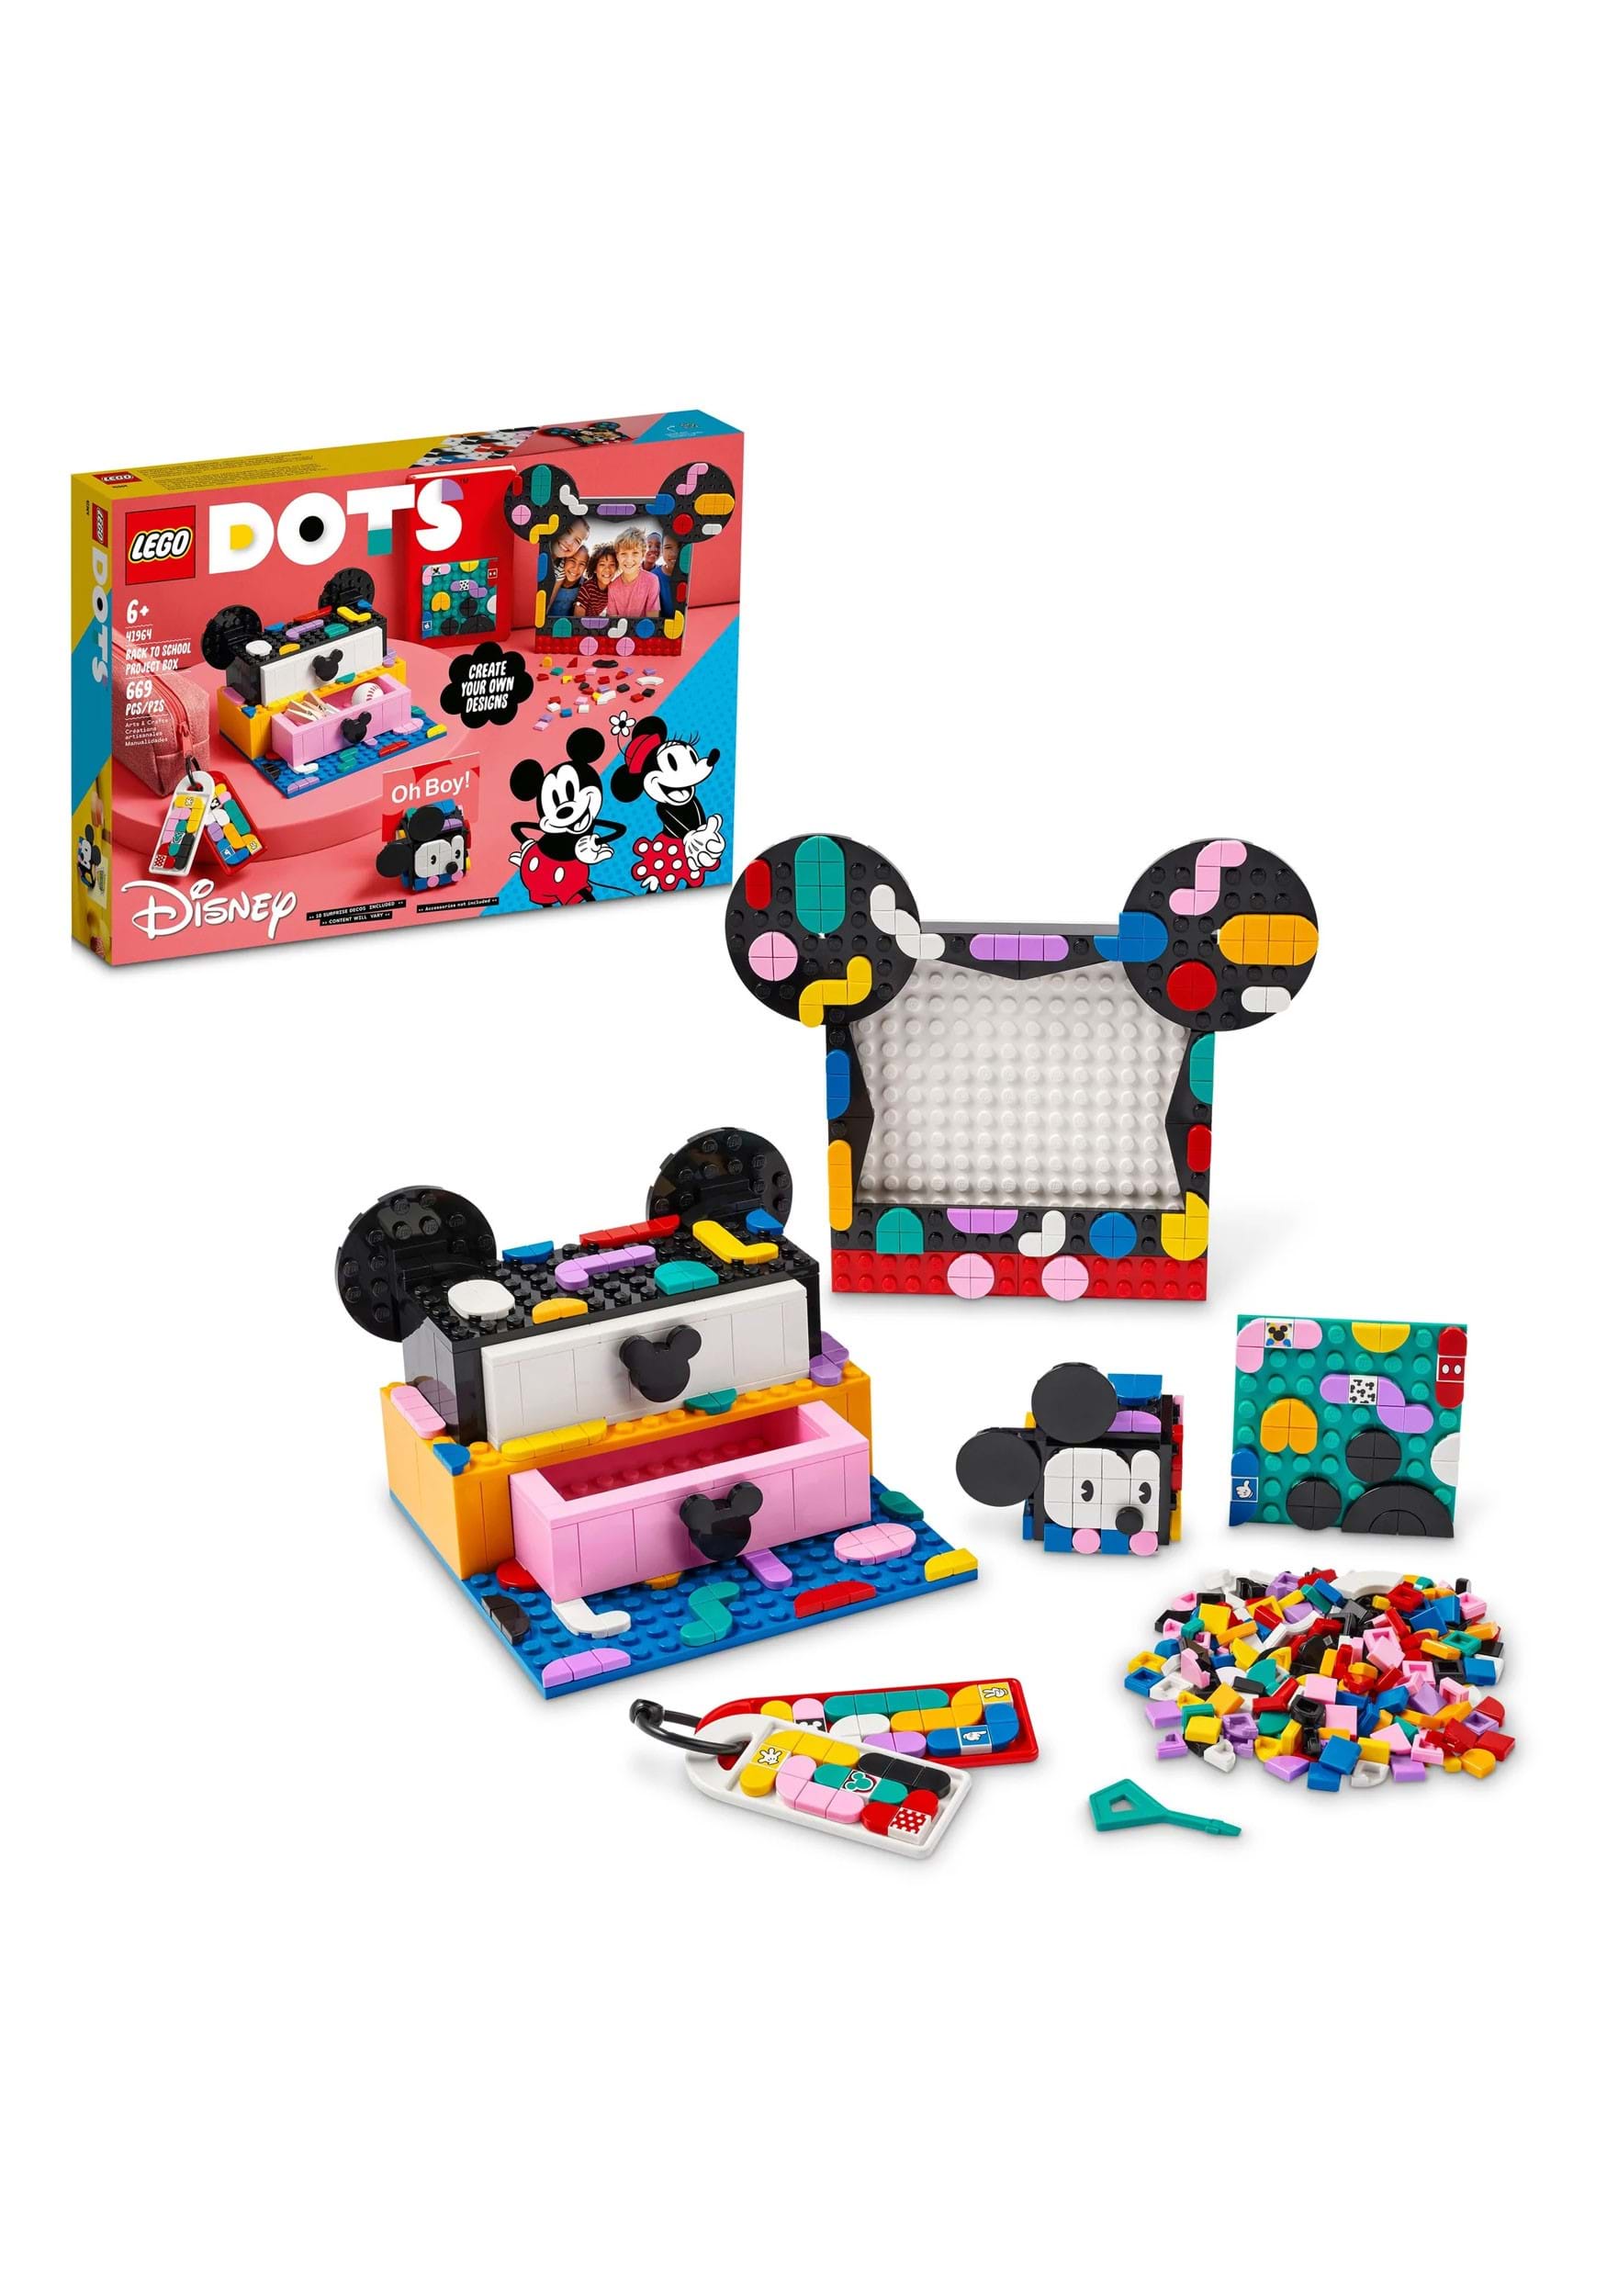 https://images.fun.com/products/89116/2-1-251556/41964-lego-dots-mickey-mouse-minnie-mouse-back-to-school-alt.jpg